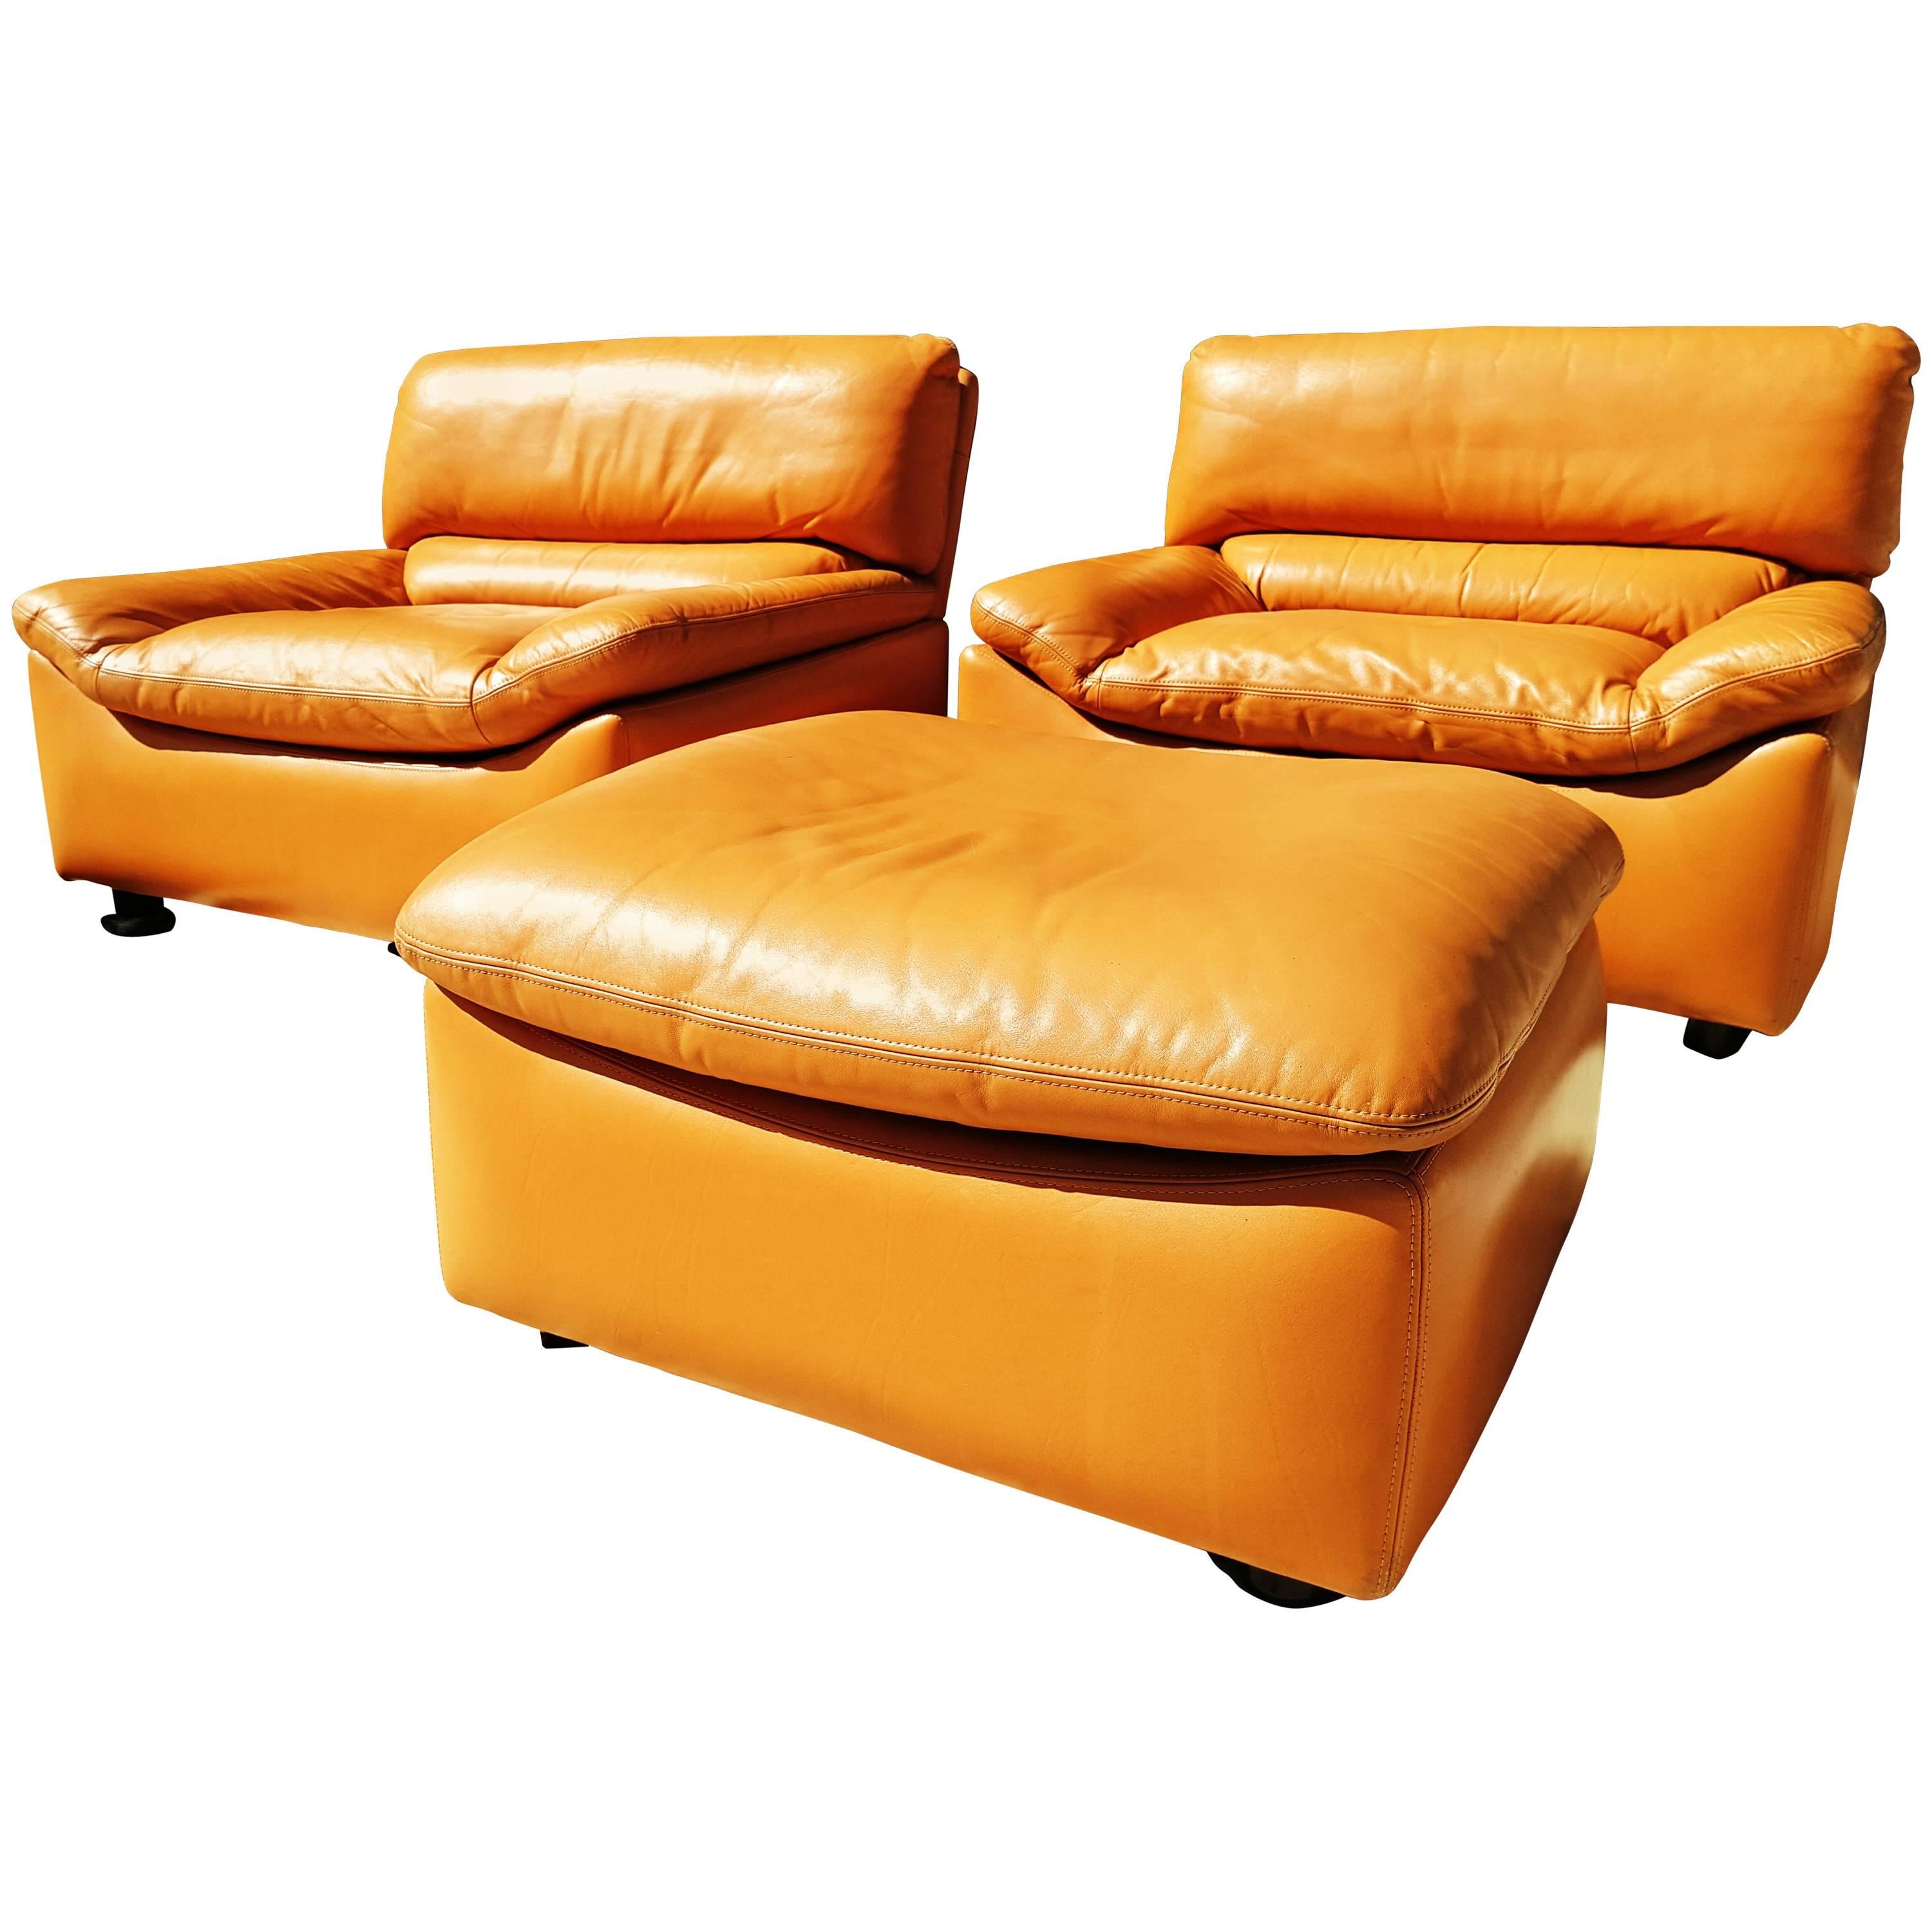 Pair of Tan Leather Lounge Chairs with Ottoman by Anita Schmidt for Durlet 1970s